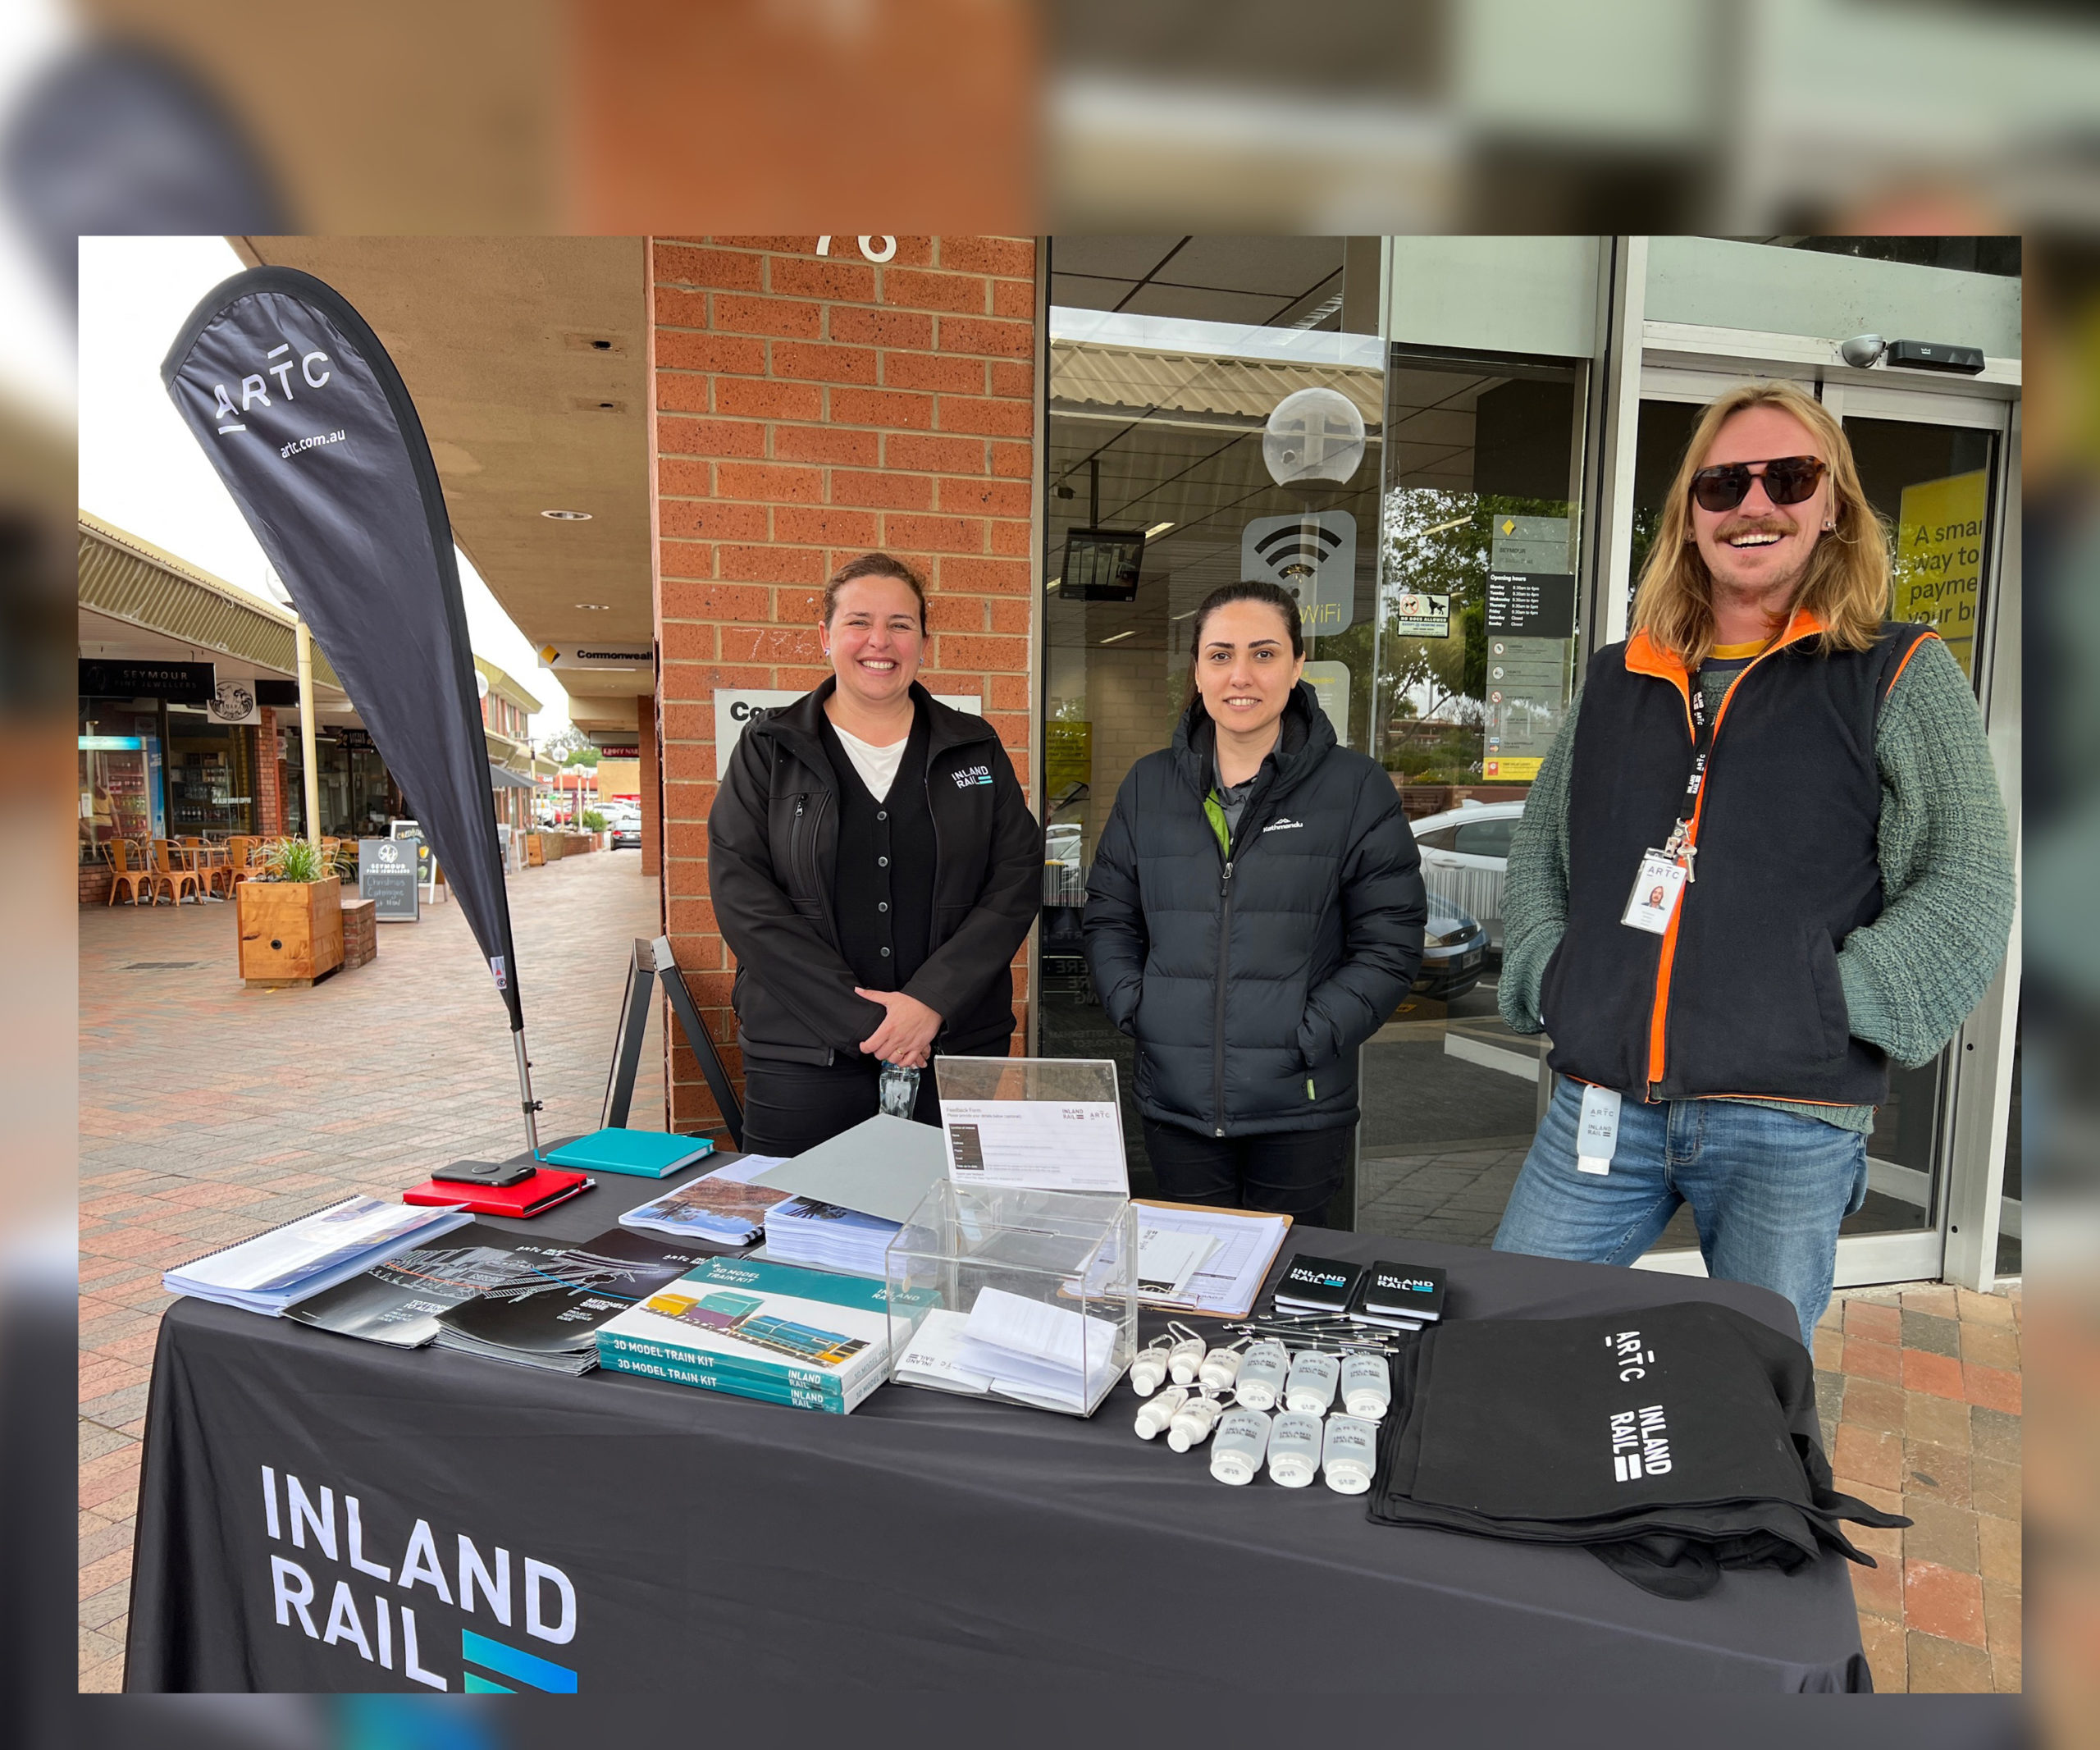 ARTC Inland Rail staff hosting a Tottenham to Albury Enviironment Report consultation stand in Seymour